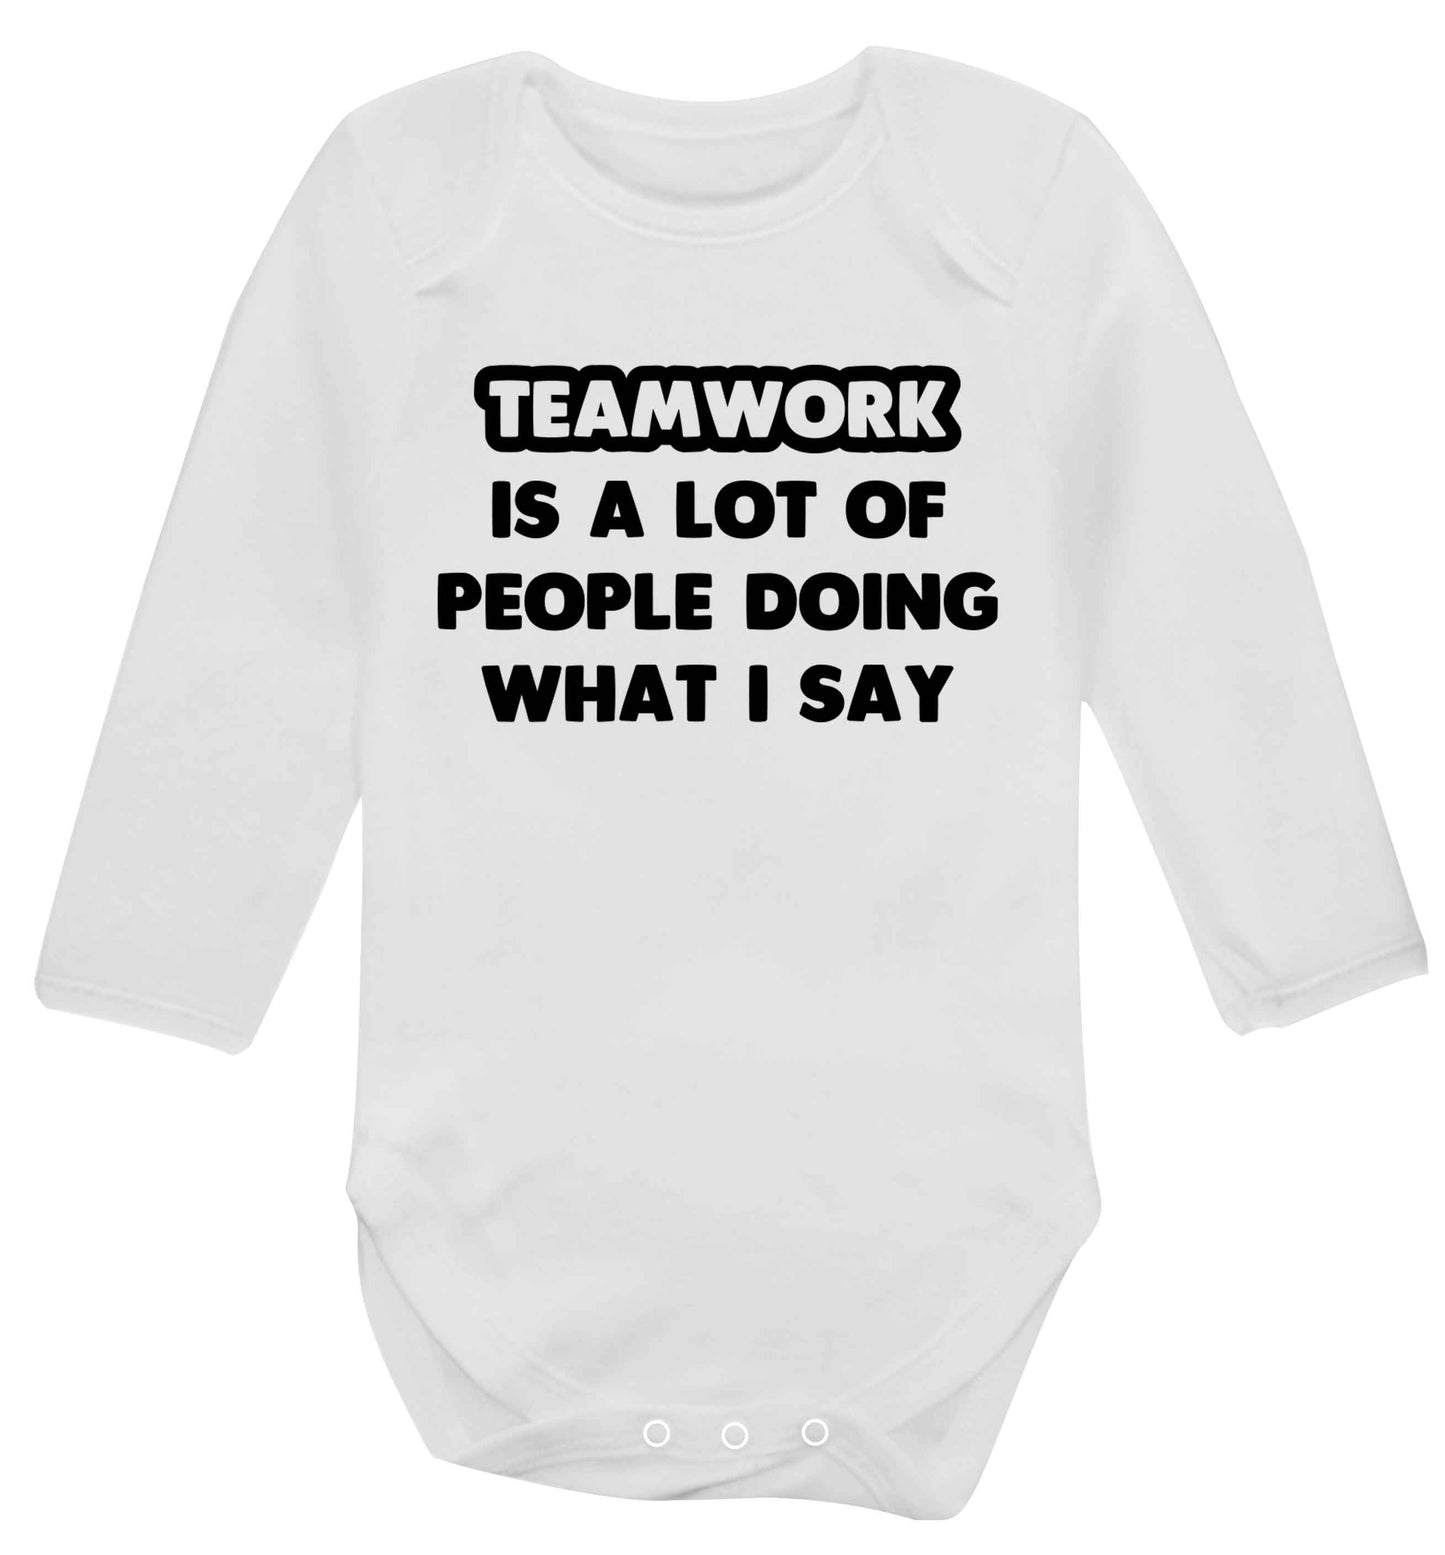 Teamwork is a lot of people doing what I say Baby Vest long sleeved white 6-12 months